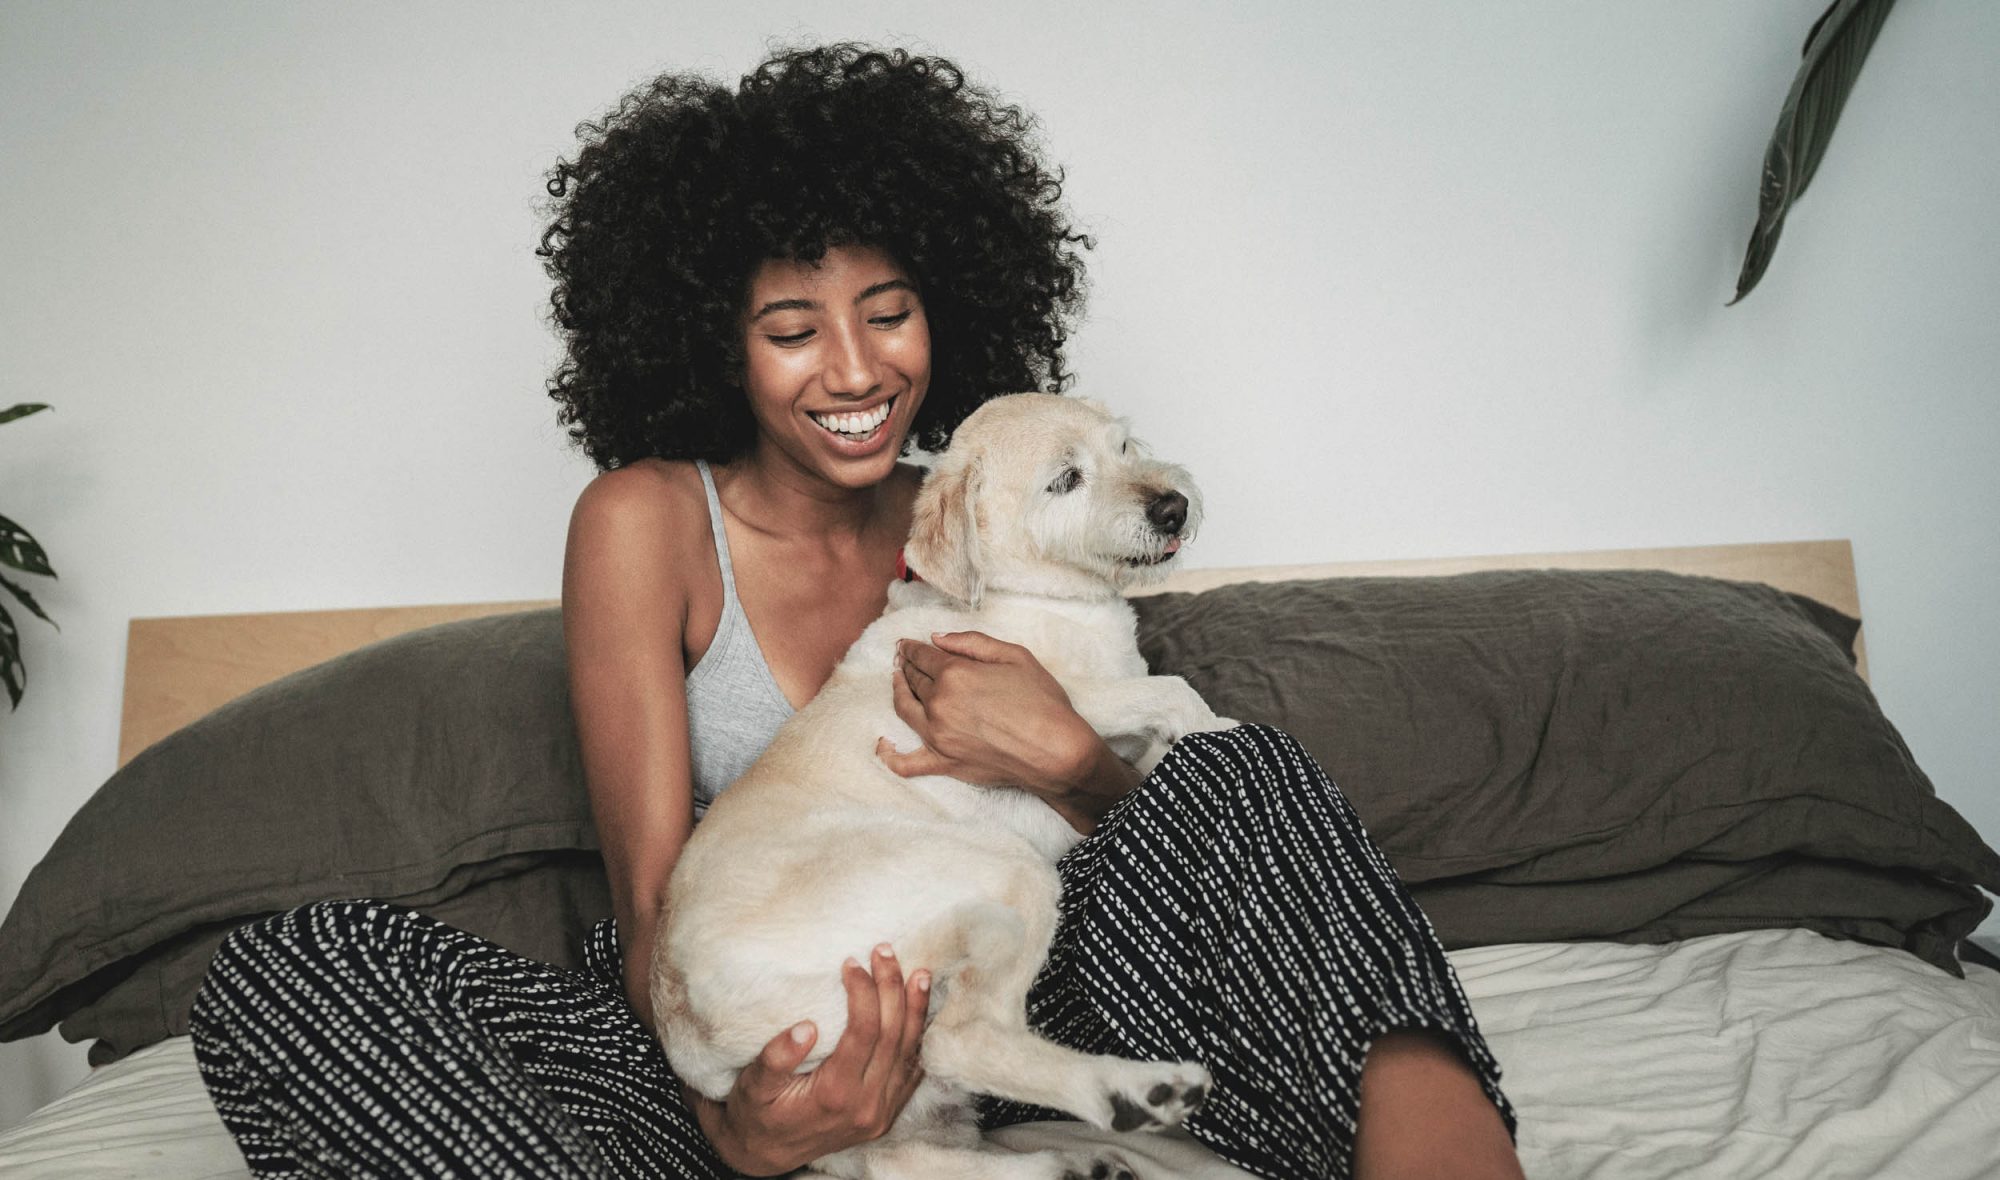 Woman laying in bed holding dog and smiling in an apartment in Greenville, SC